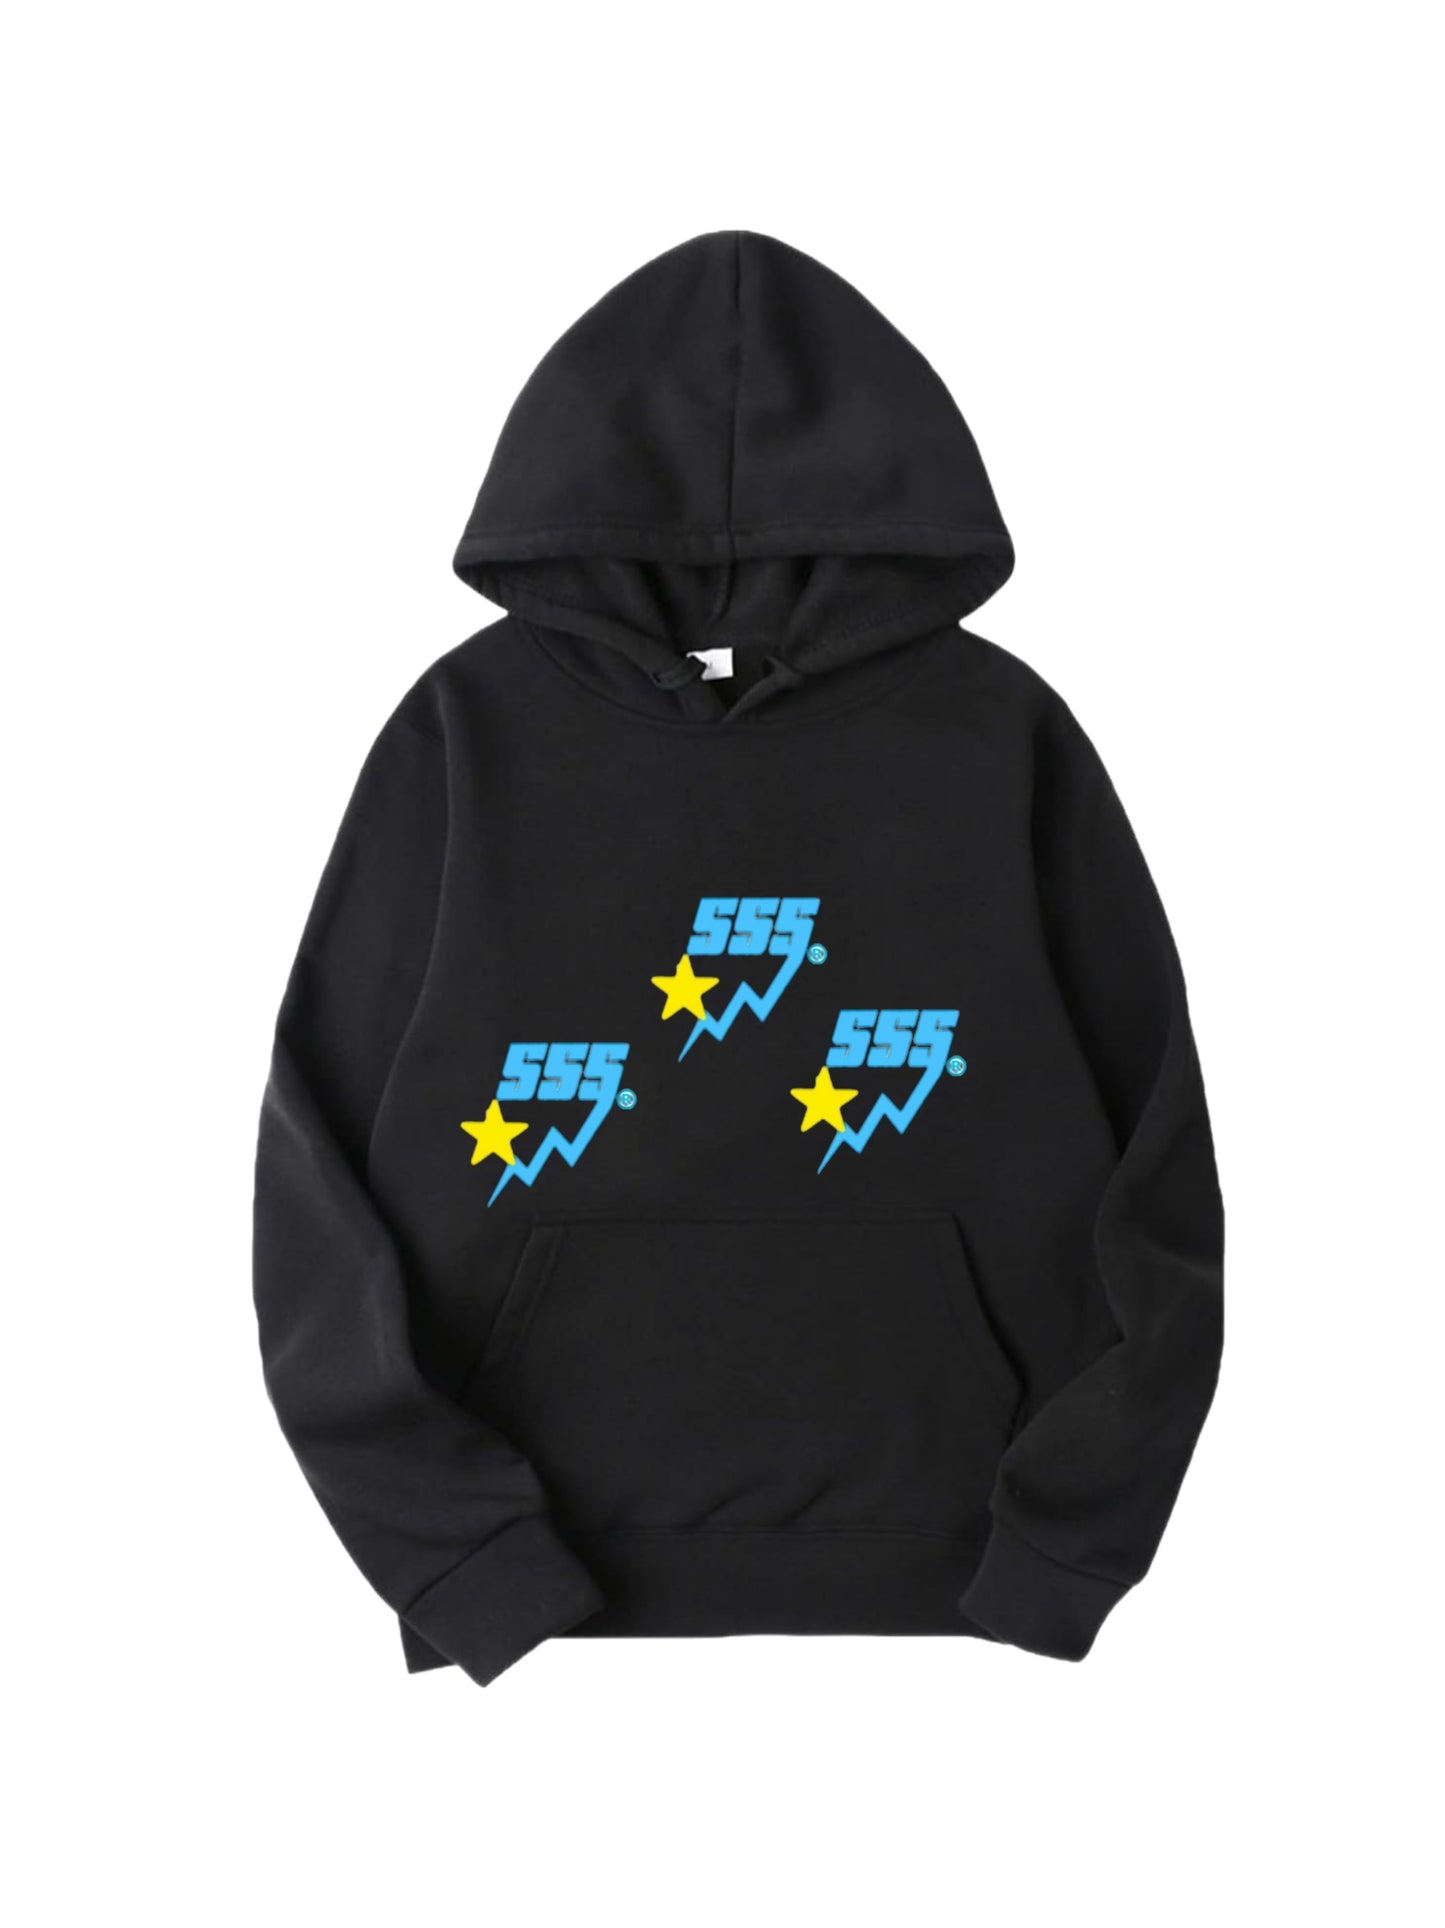 Yellow And Blue Star hoodies